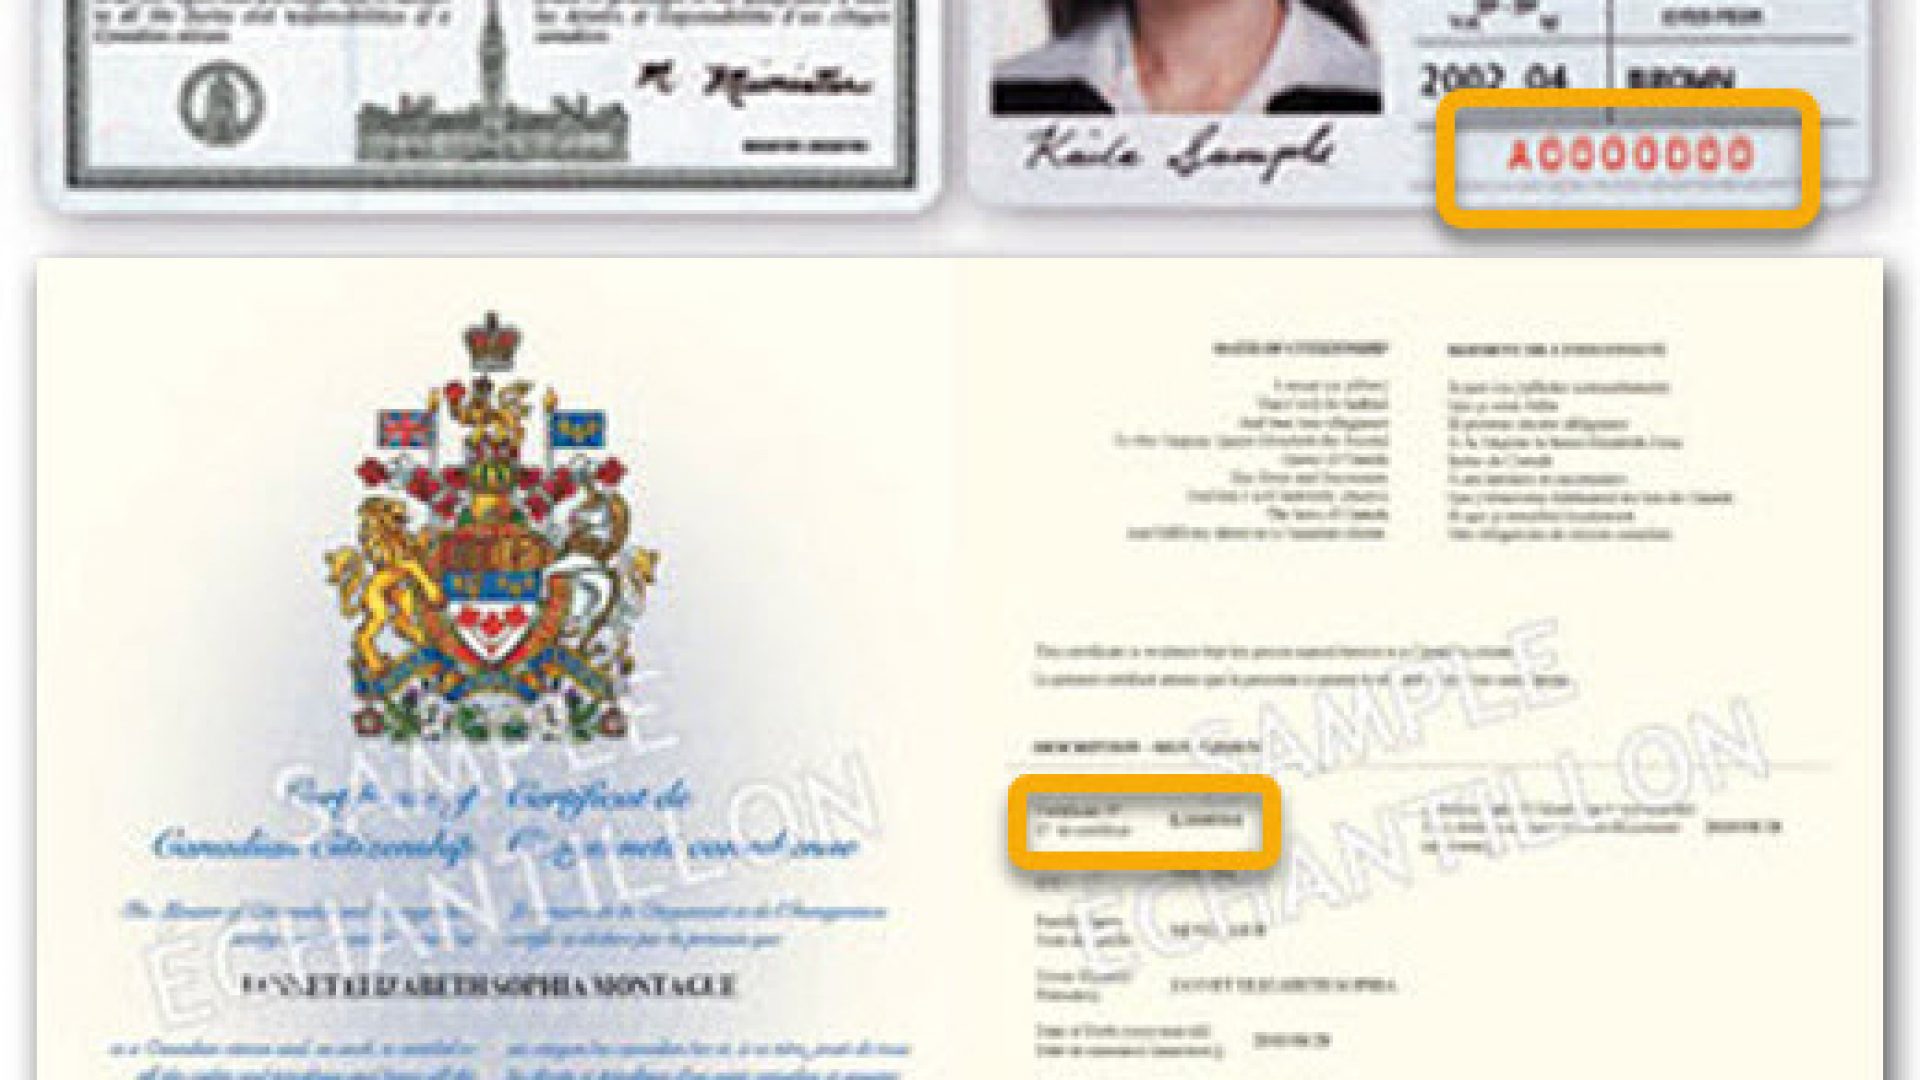 number on the citizenship card and certificate